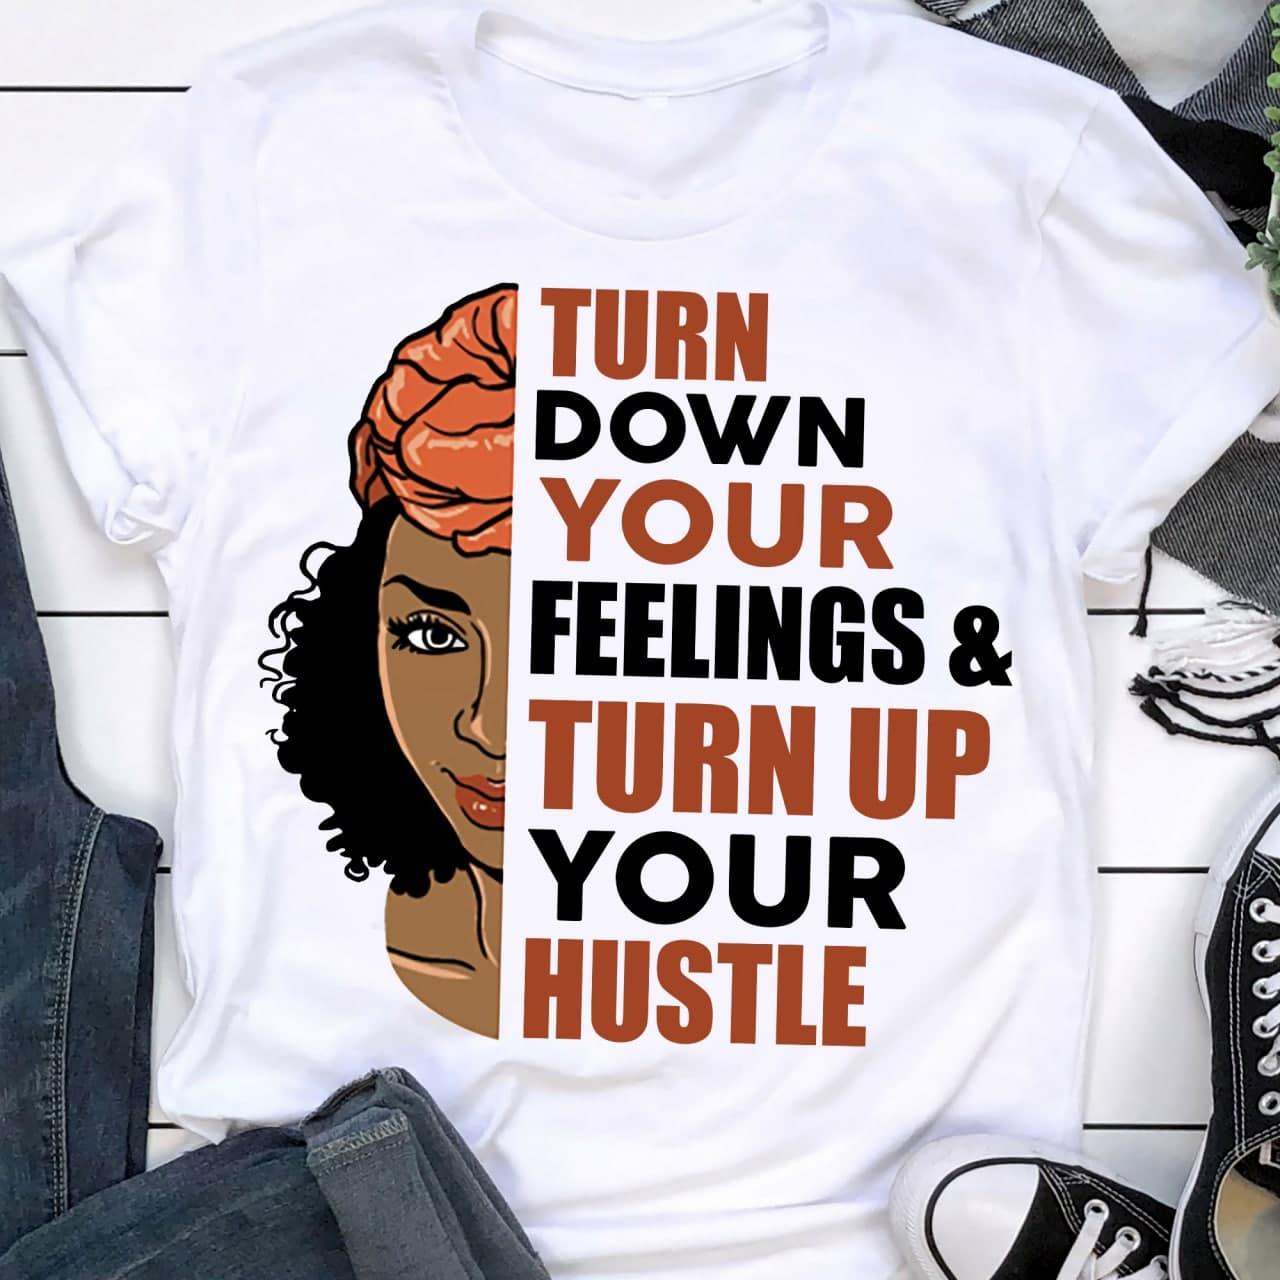 Black Woman - Turn down your feelings and turn up your hustle